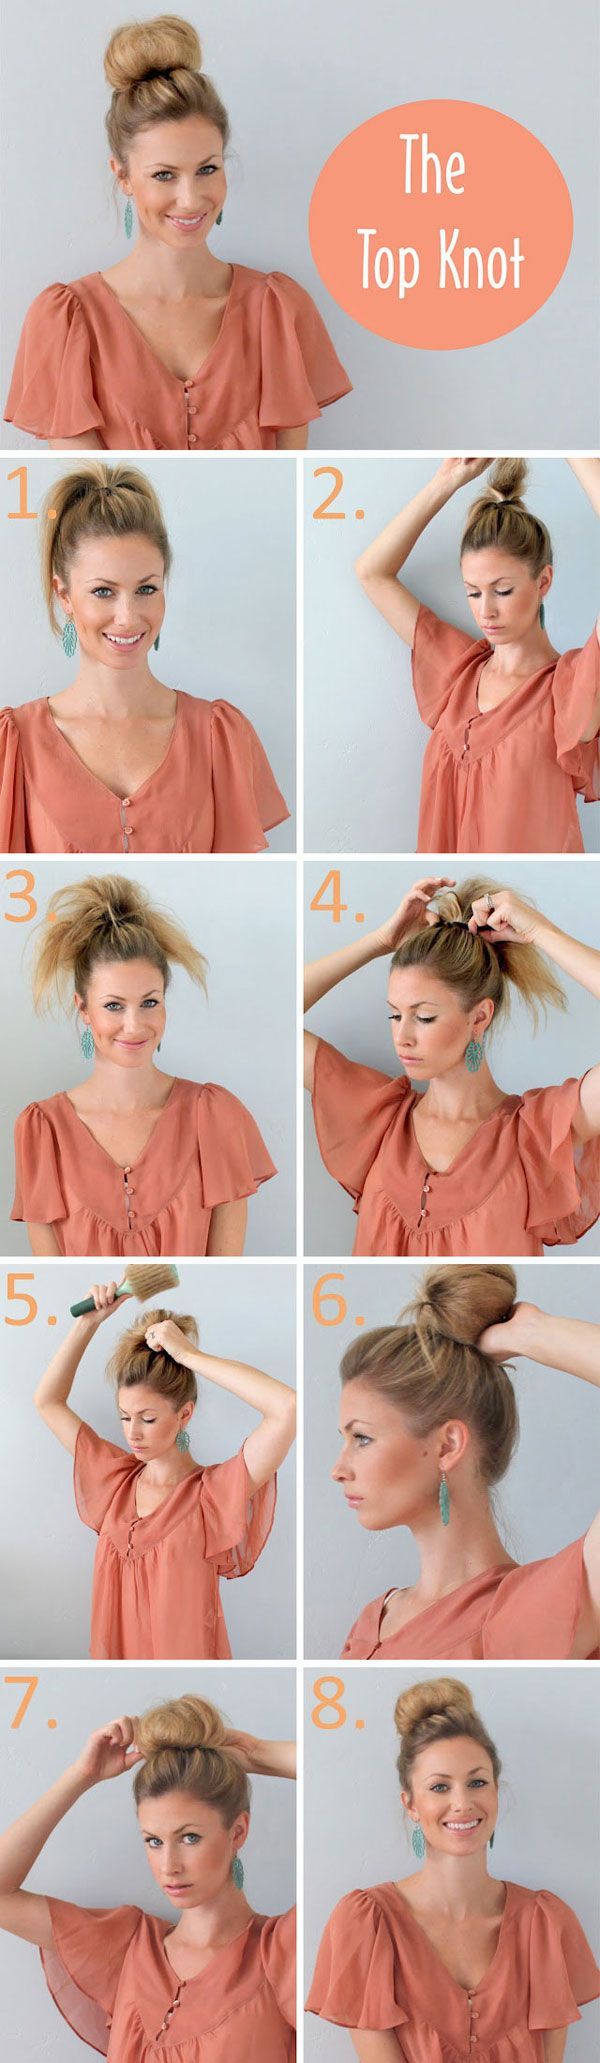 Great+tutorial:+The+top+knot